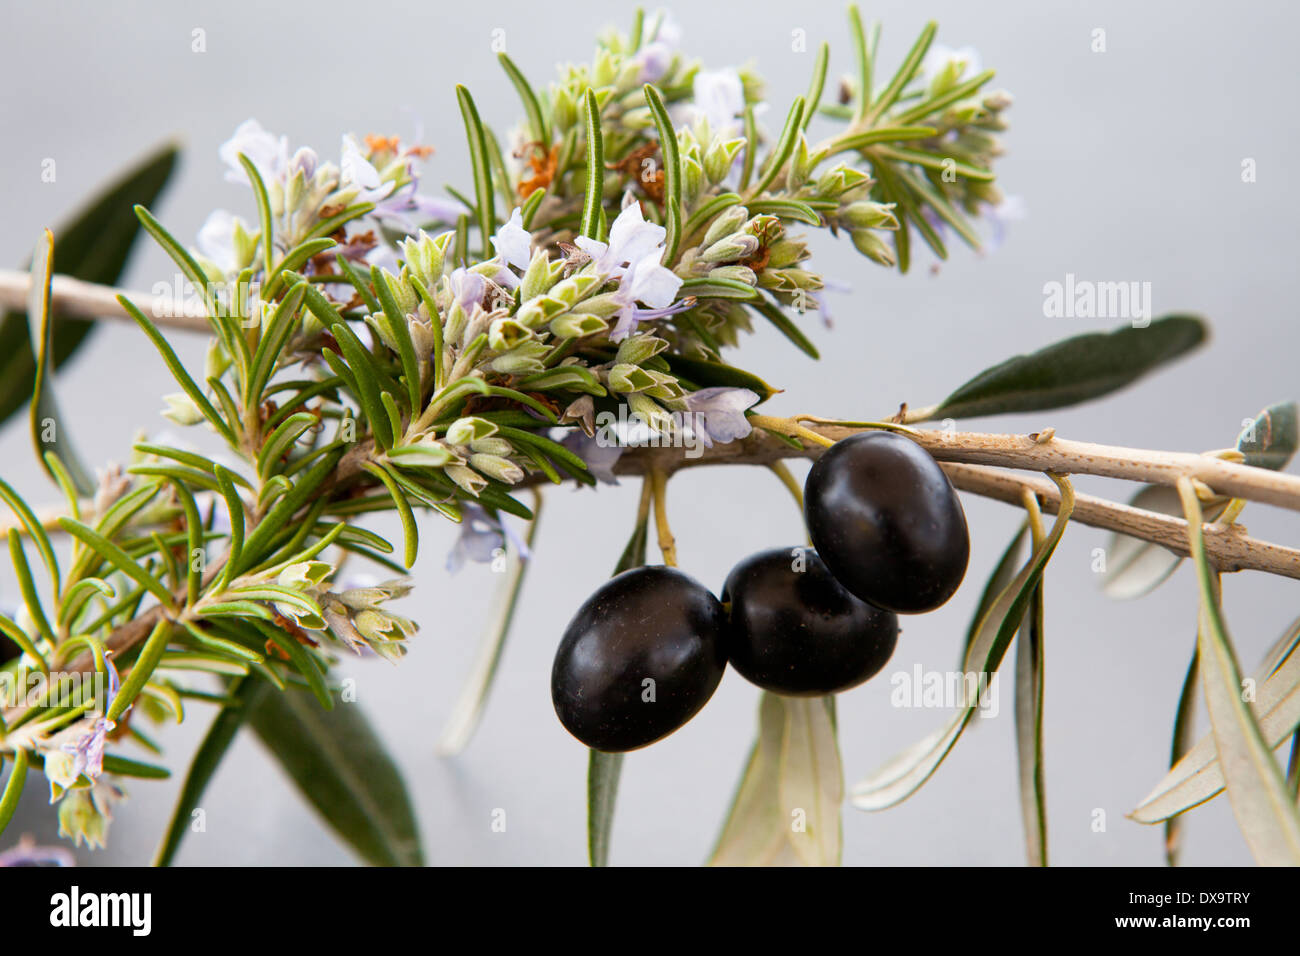 branch of black olives, rosemary and olive leaves Stock Photo